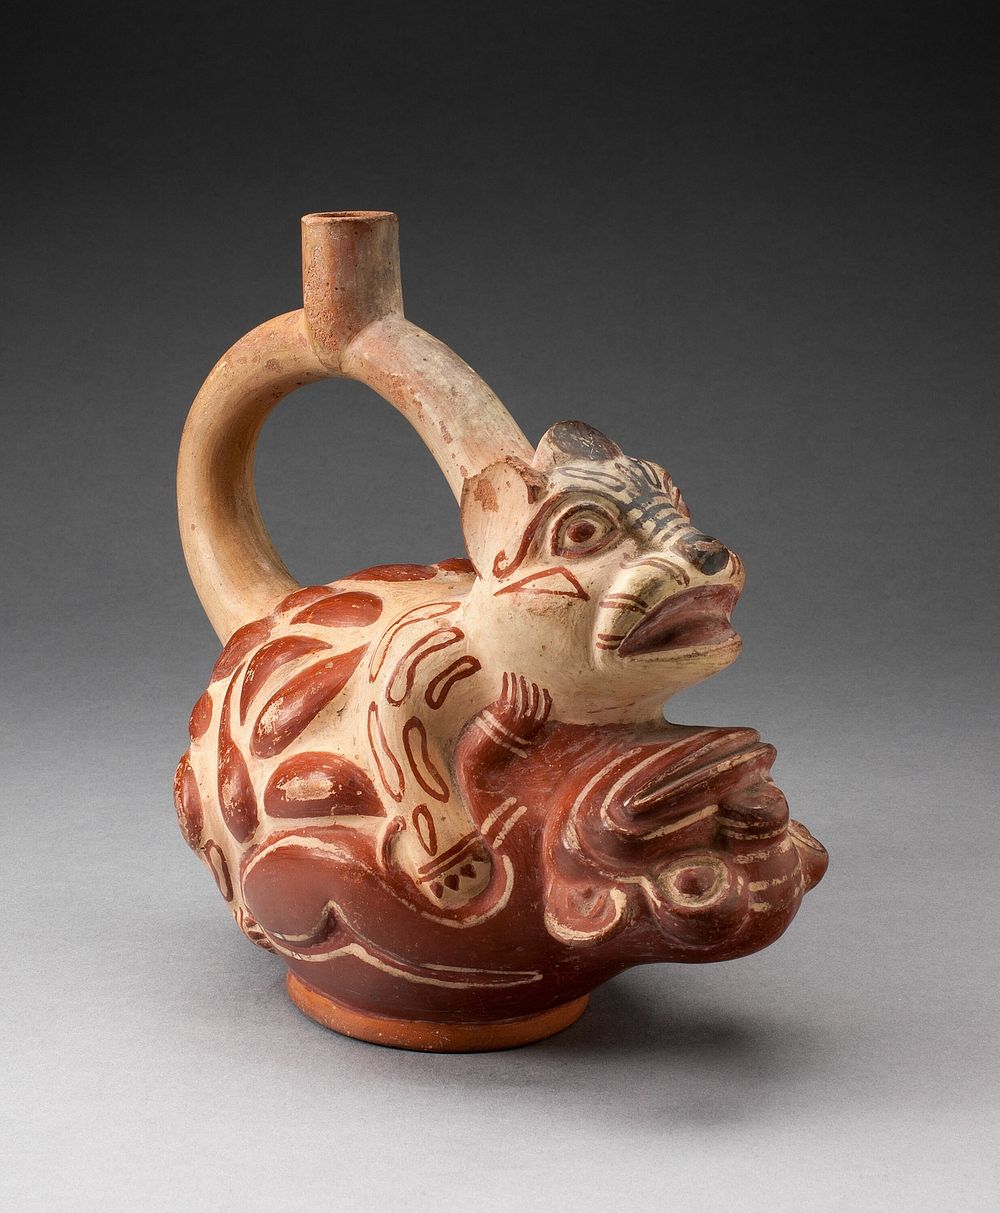 Vessel in Form of Two Pumas by Moche